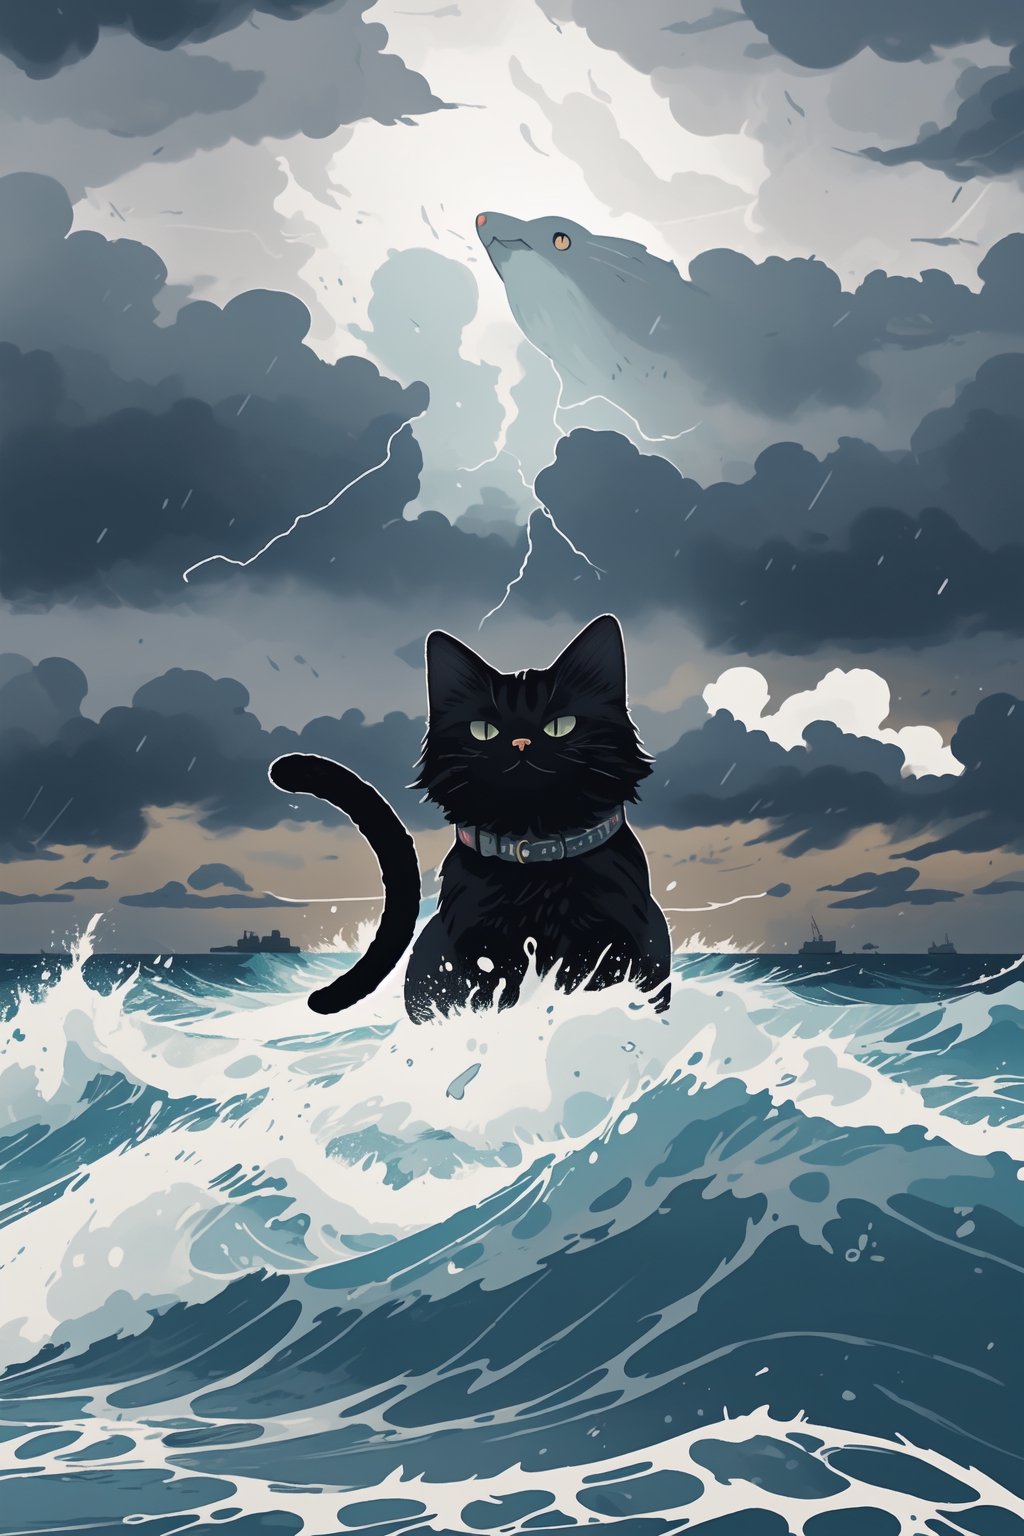 Full frame, two colors, texture, stormy imagery, poster design,ruanyi0137,cat